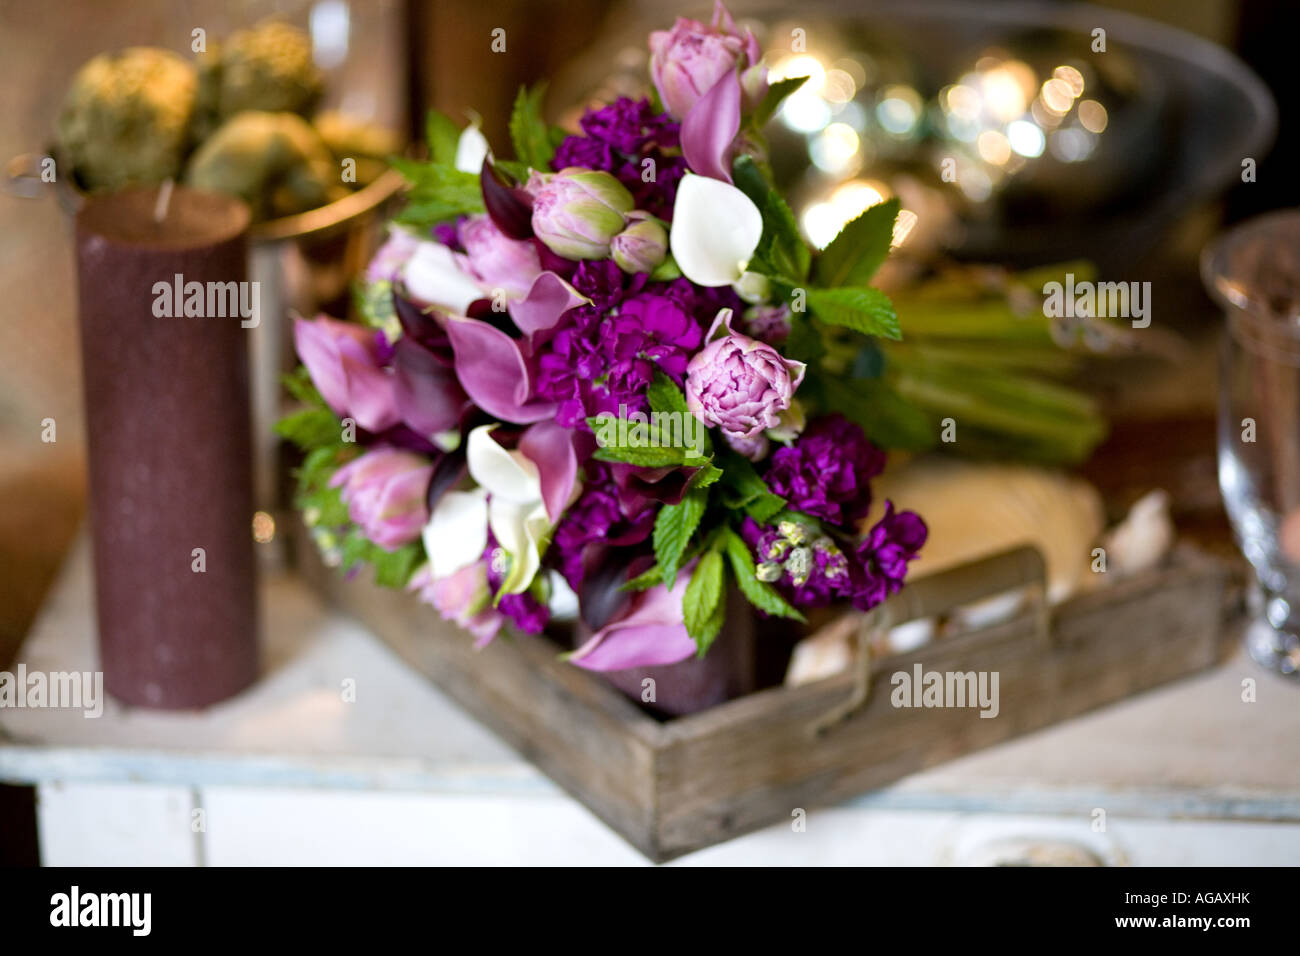 A beautiful purple and white fresh flower hand tied bridal bouquet Stock Photo